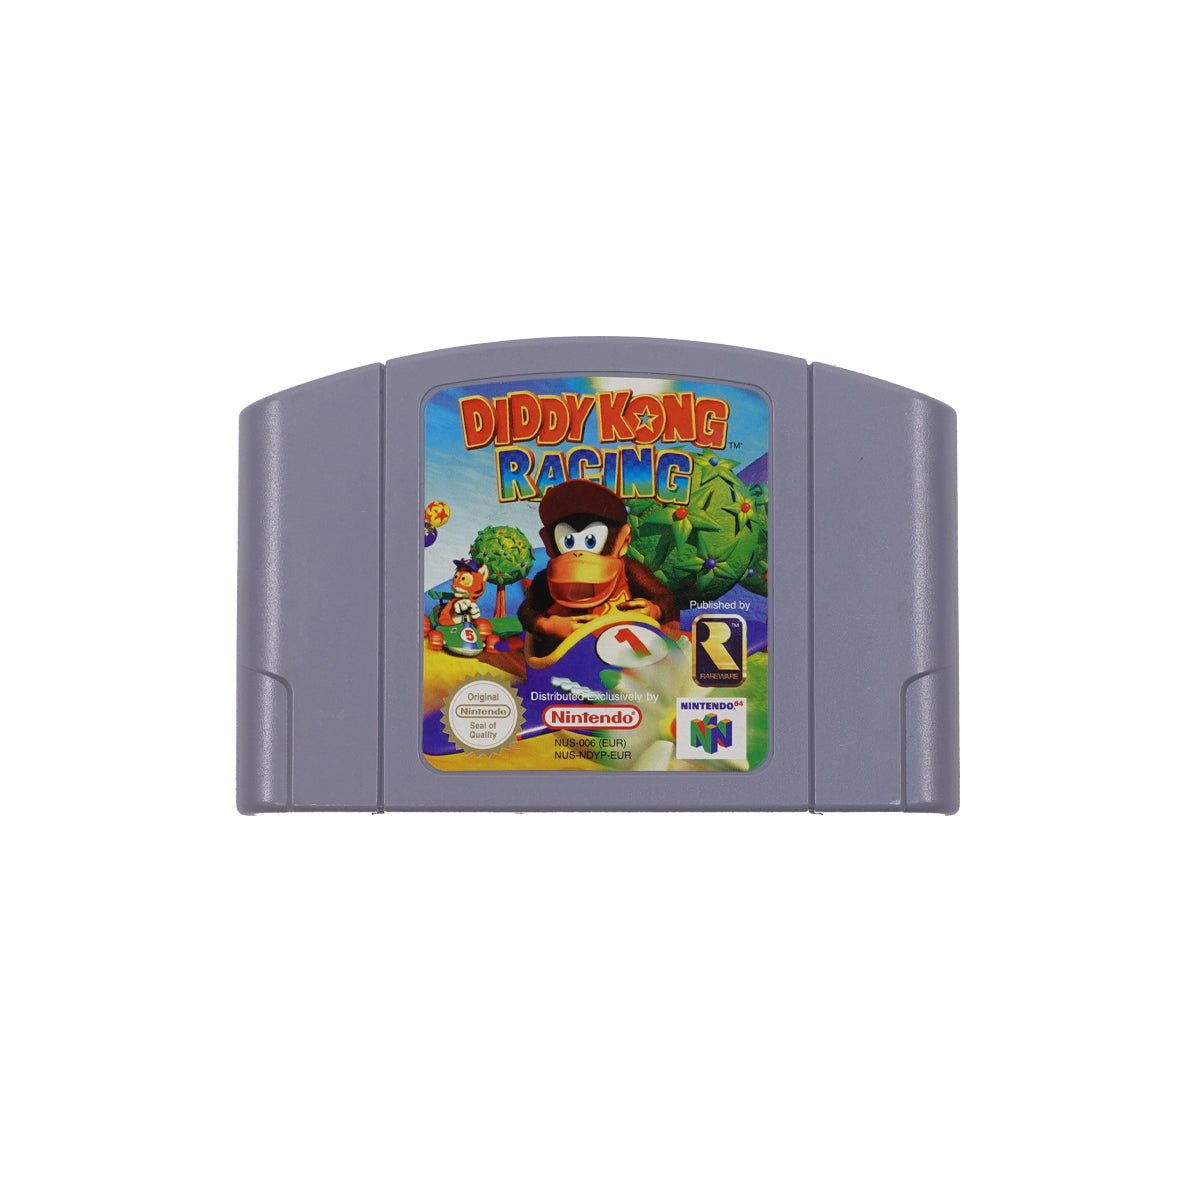 (Pre-Owned) Diddy Kong Racing Video Game For Nintendo 64 - Store 974 | ستور ٩٧٤